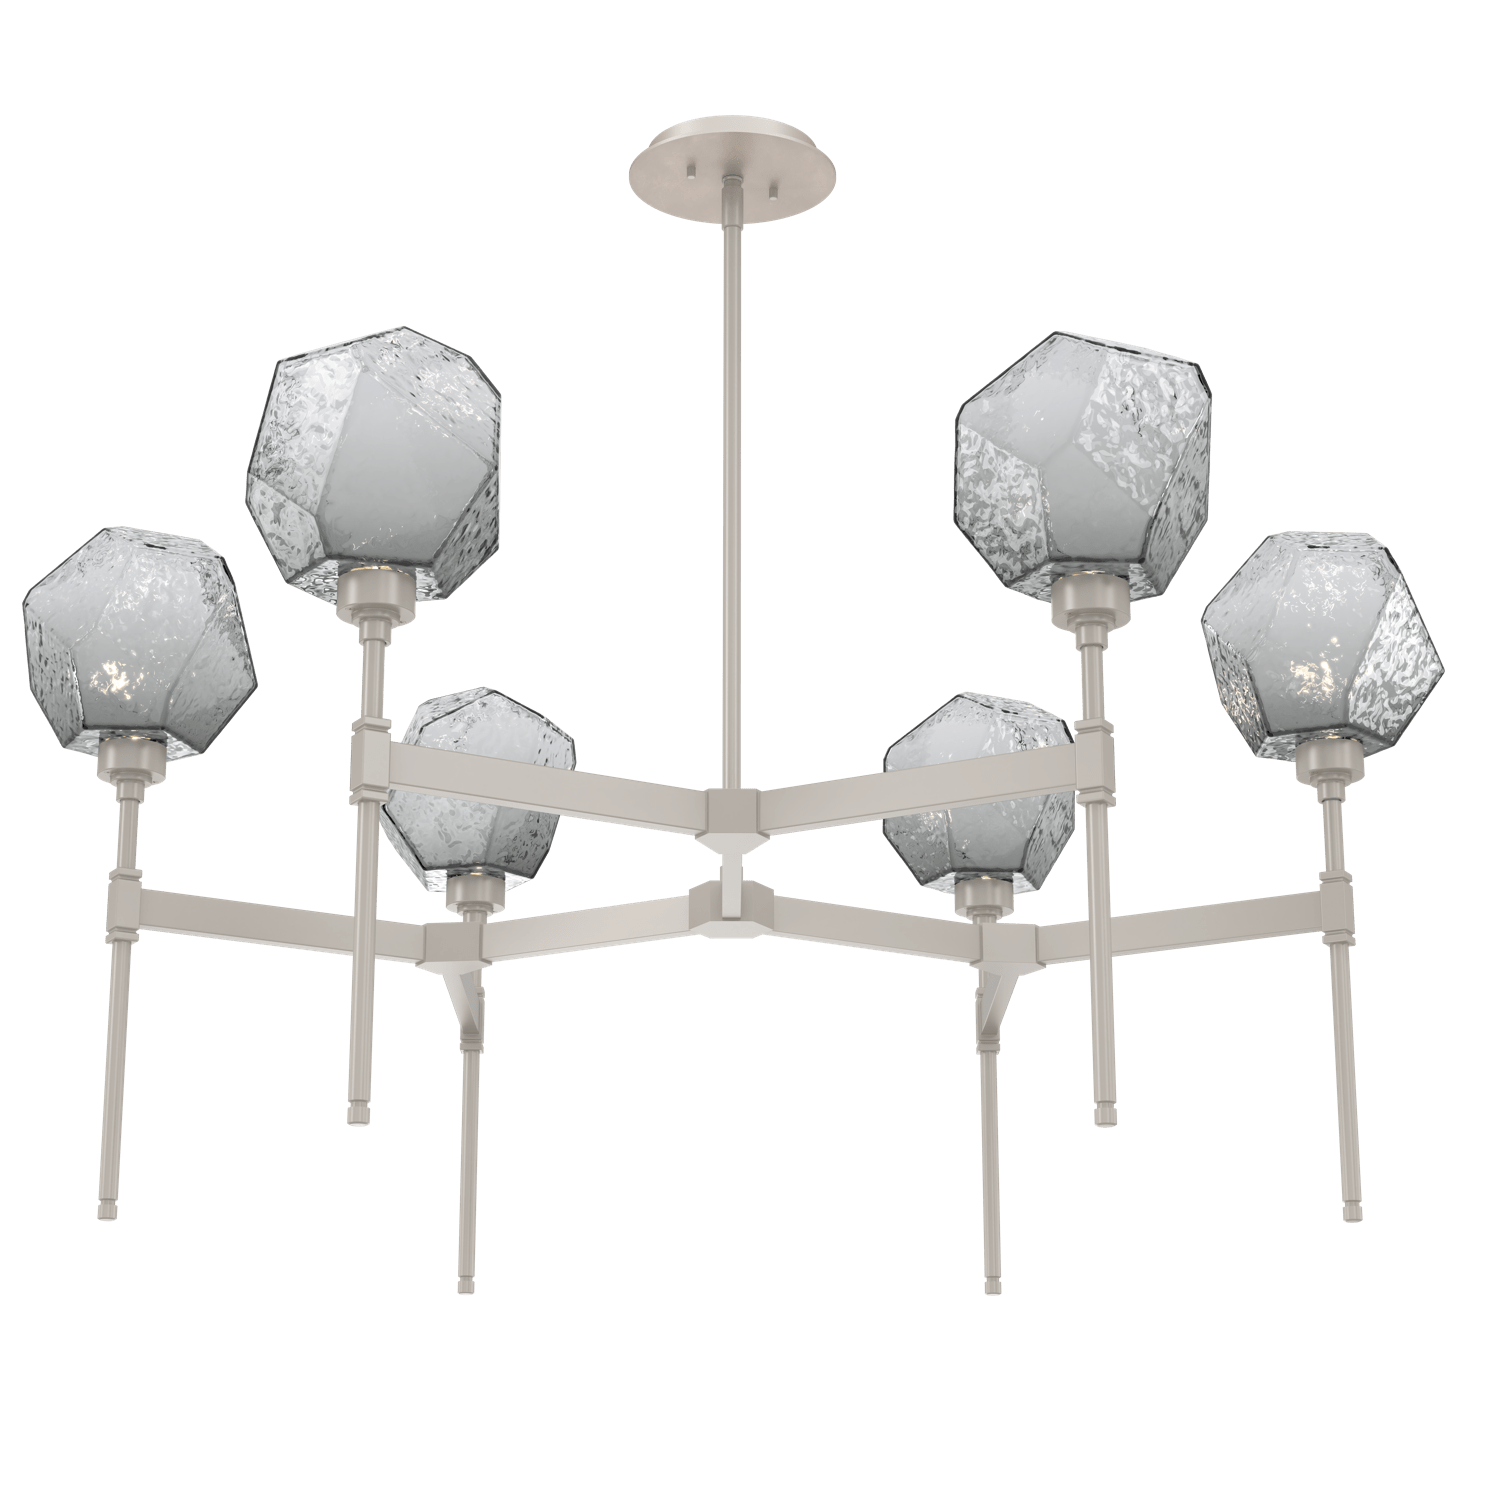 CHB0039-39-BS-S-Hammerton-Studio-Gem-round-belvedere-chandelier-with-metallic-beige-silver-finish-and-smoke-blown-glass-shades-and-LED-lamping